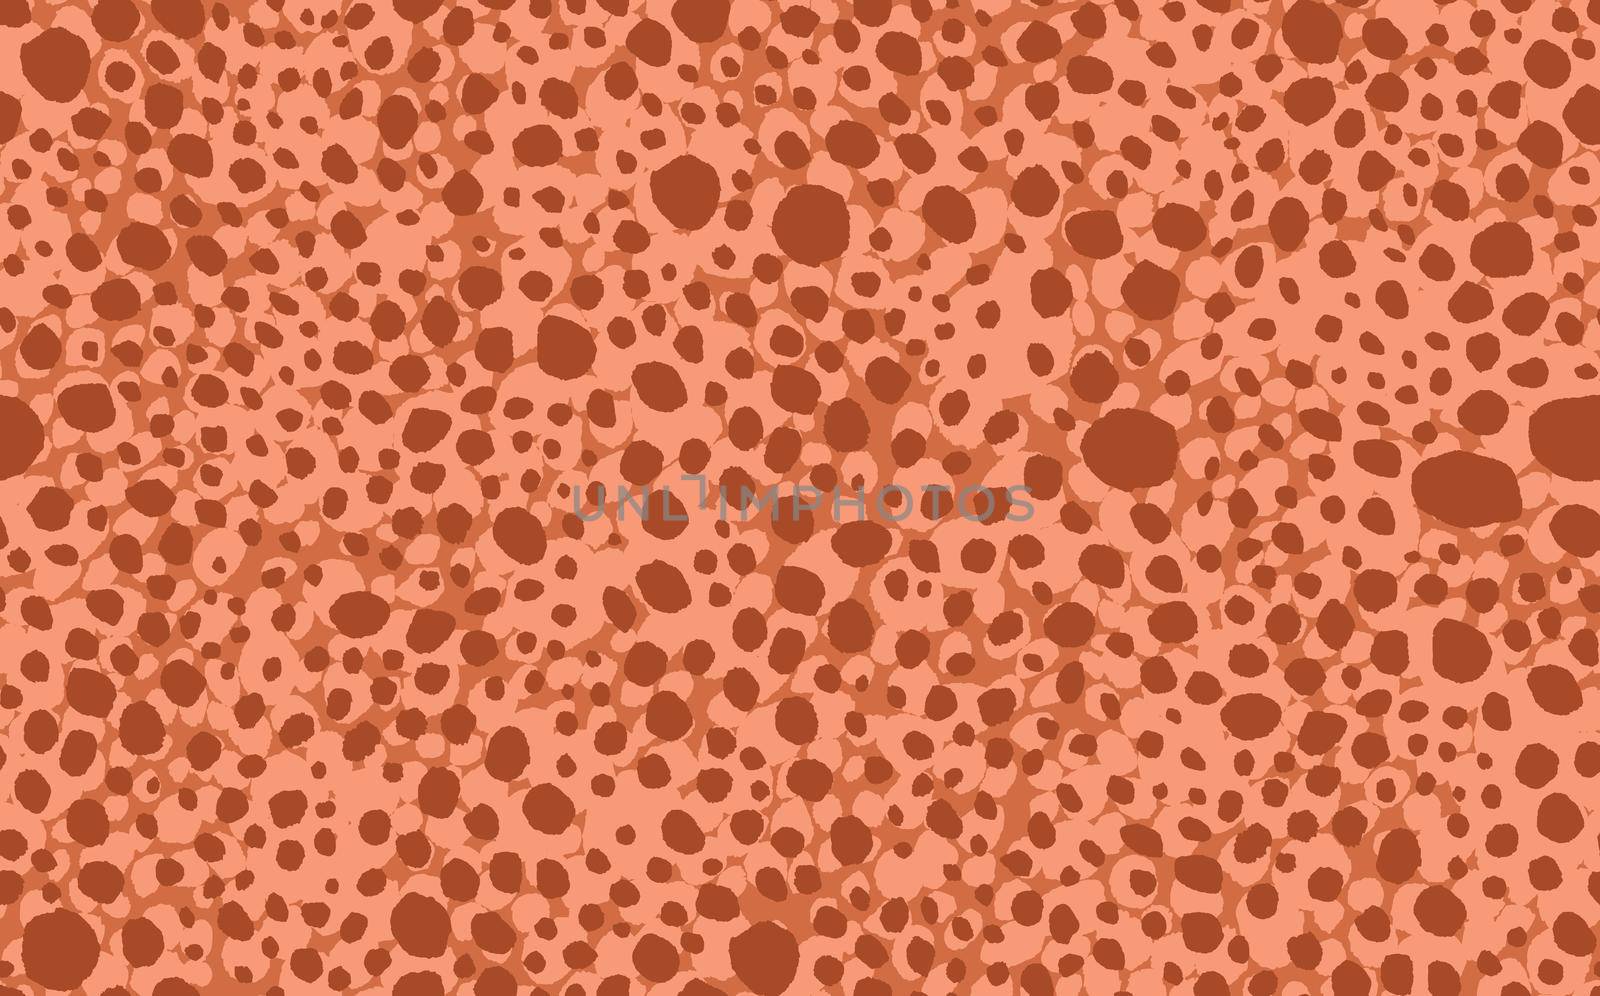 Abstract modern leopard seamless pattern. Animals trendy background. Beige and brown decorative vector stock illustration for print, card, postcard, fabric, textile. Modern ornament of stylized skin.